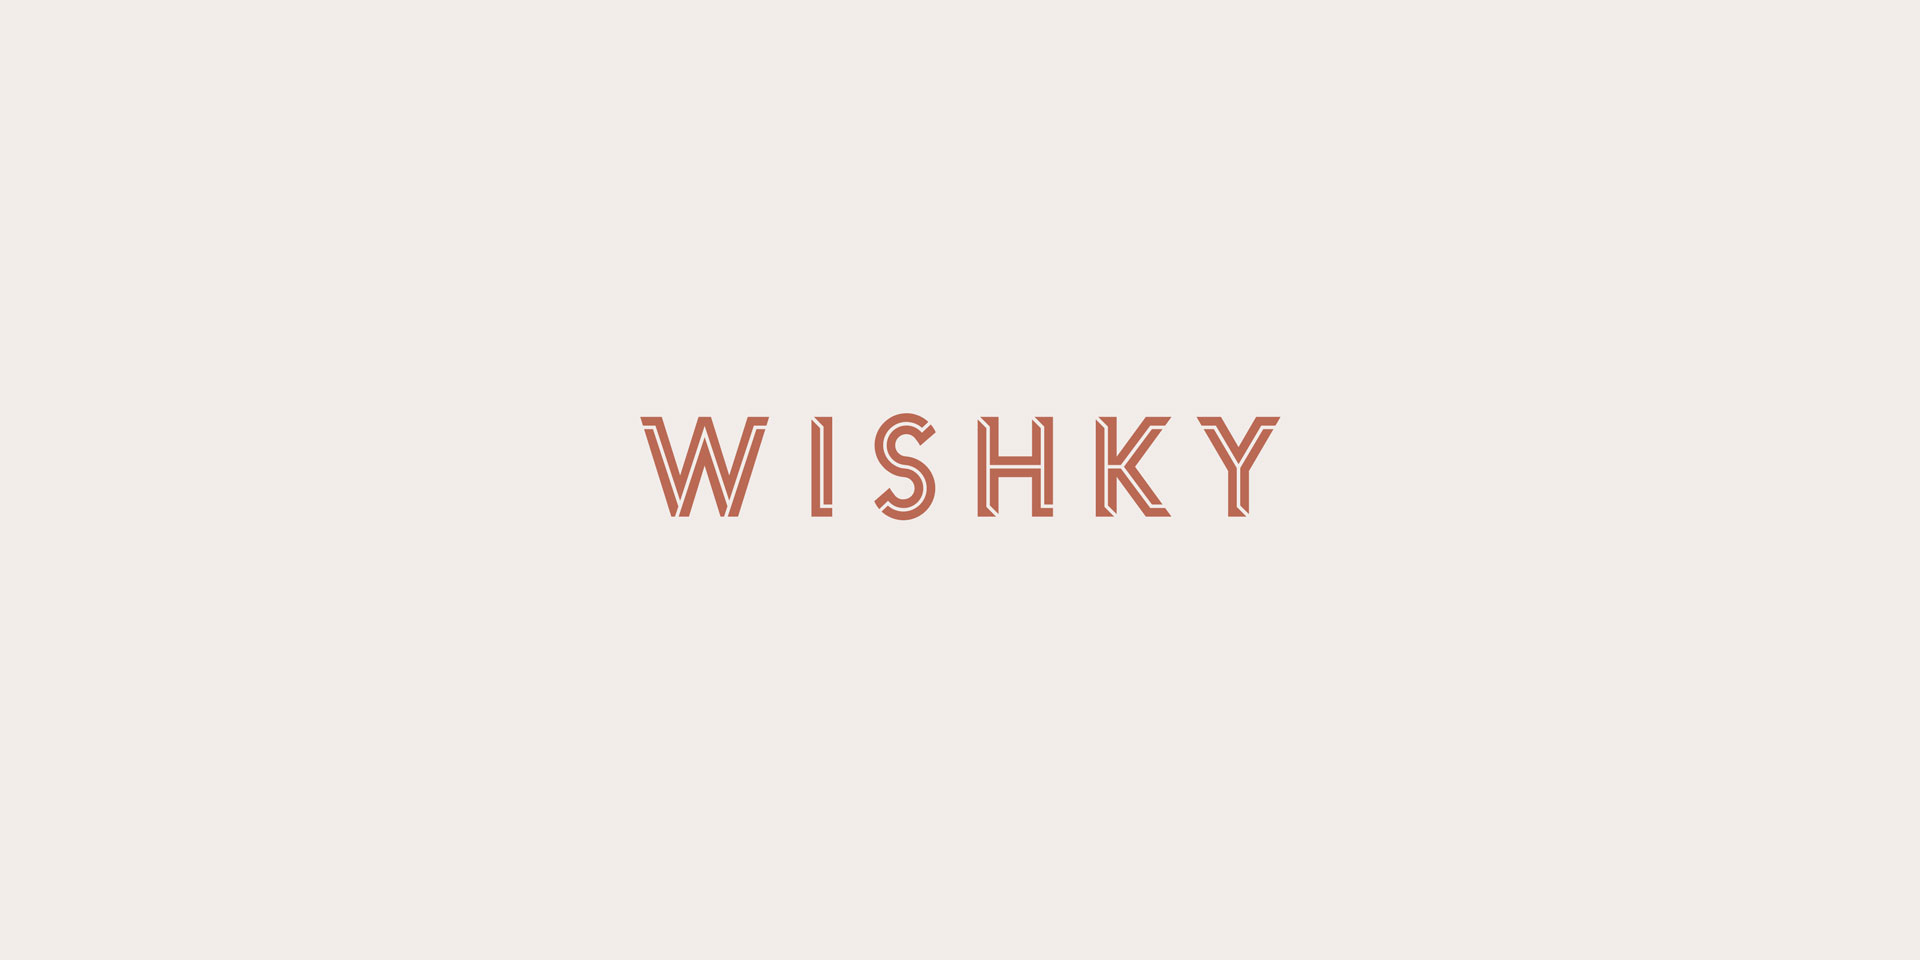 Whisky branding project